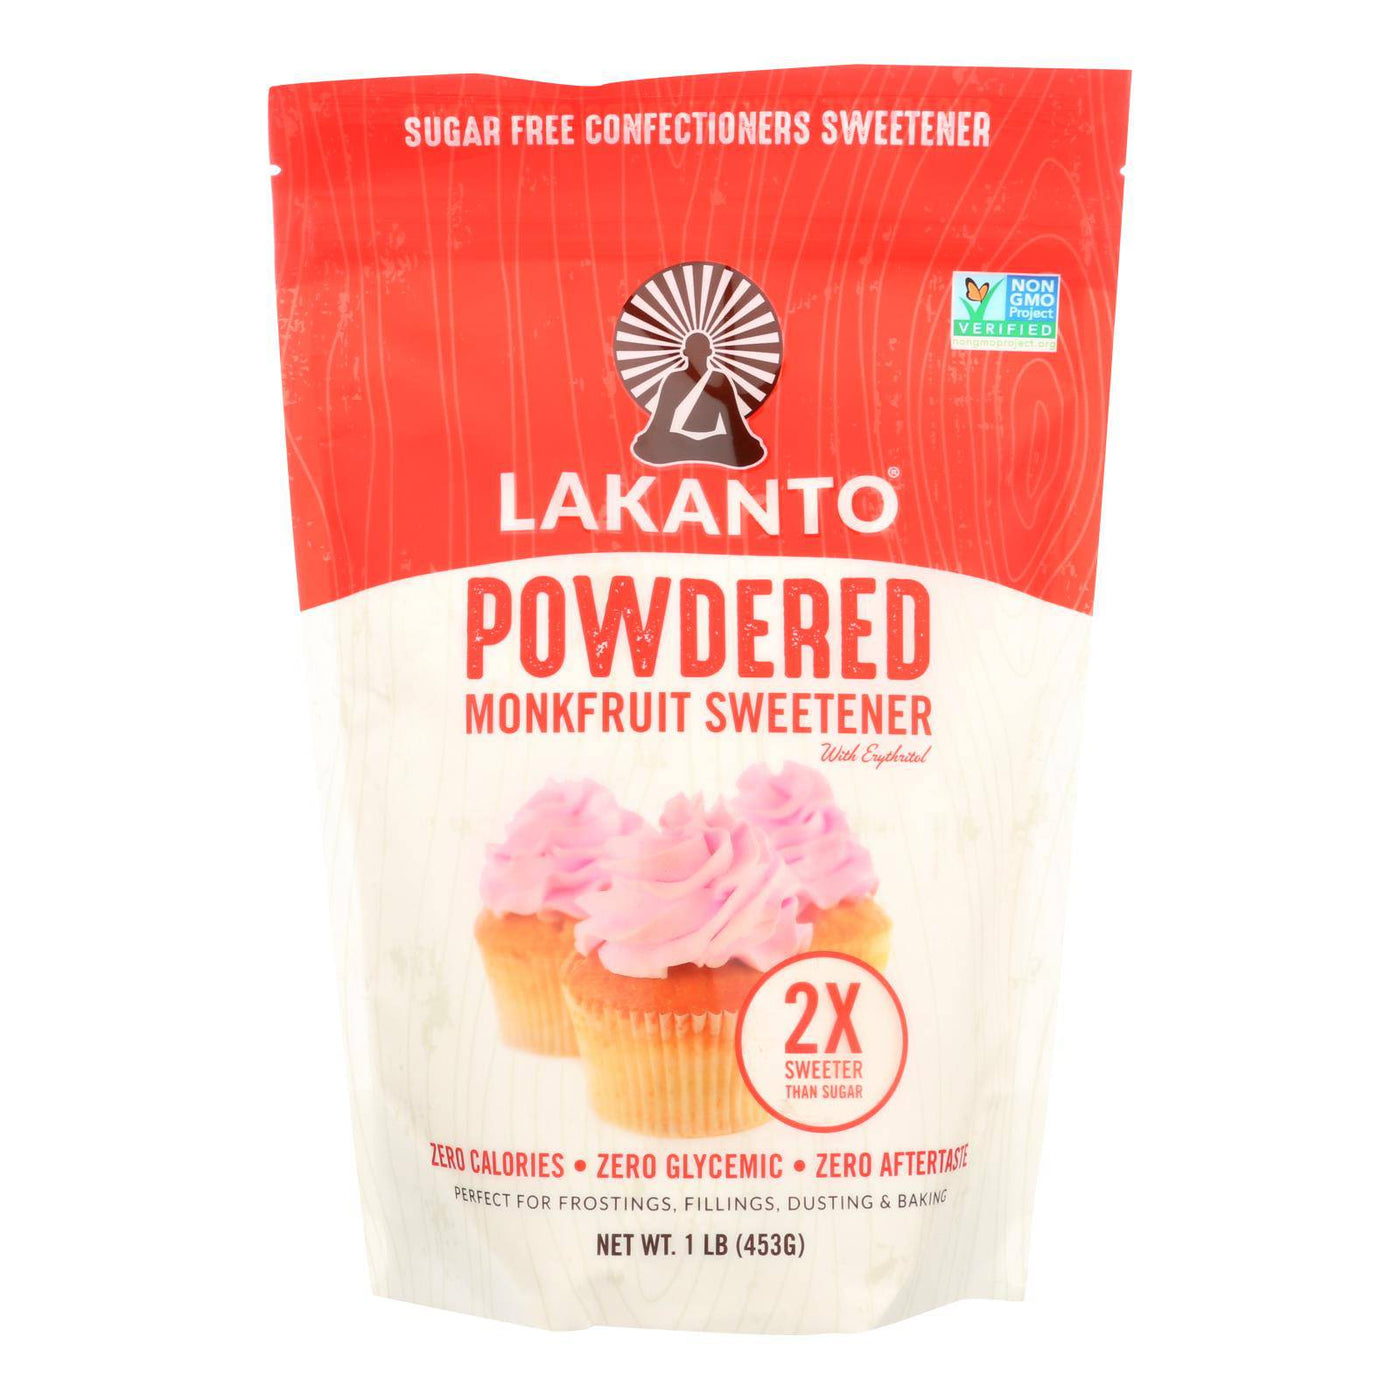 Lakanto Powdered Monkfruit Sweetener With Erythritol  - Case Of 8 - 1 Lb | OnlyNaturals.us